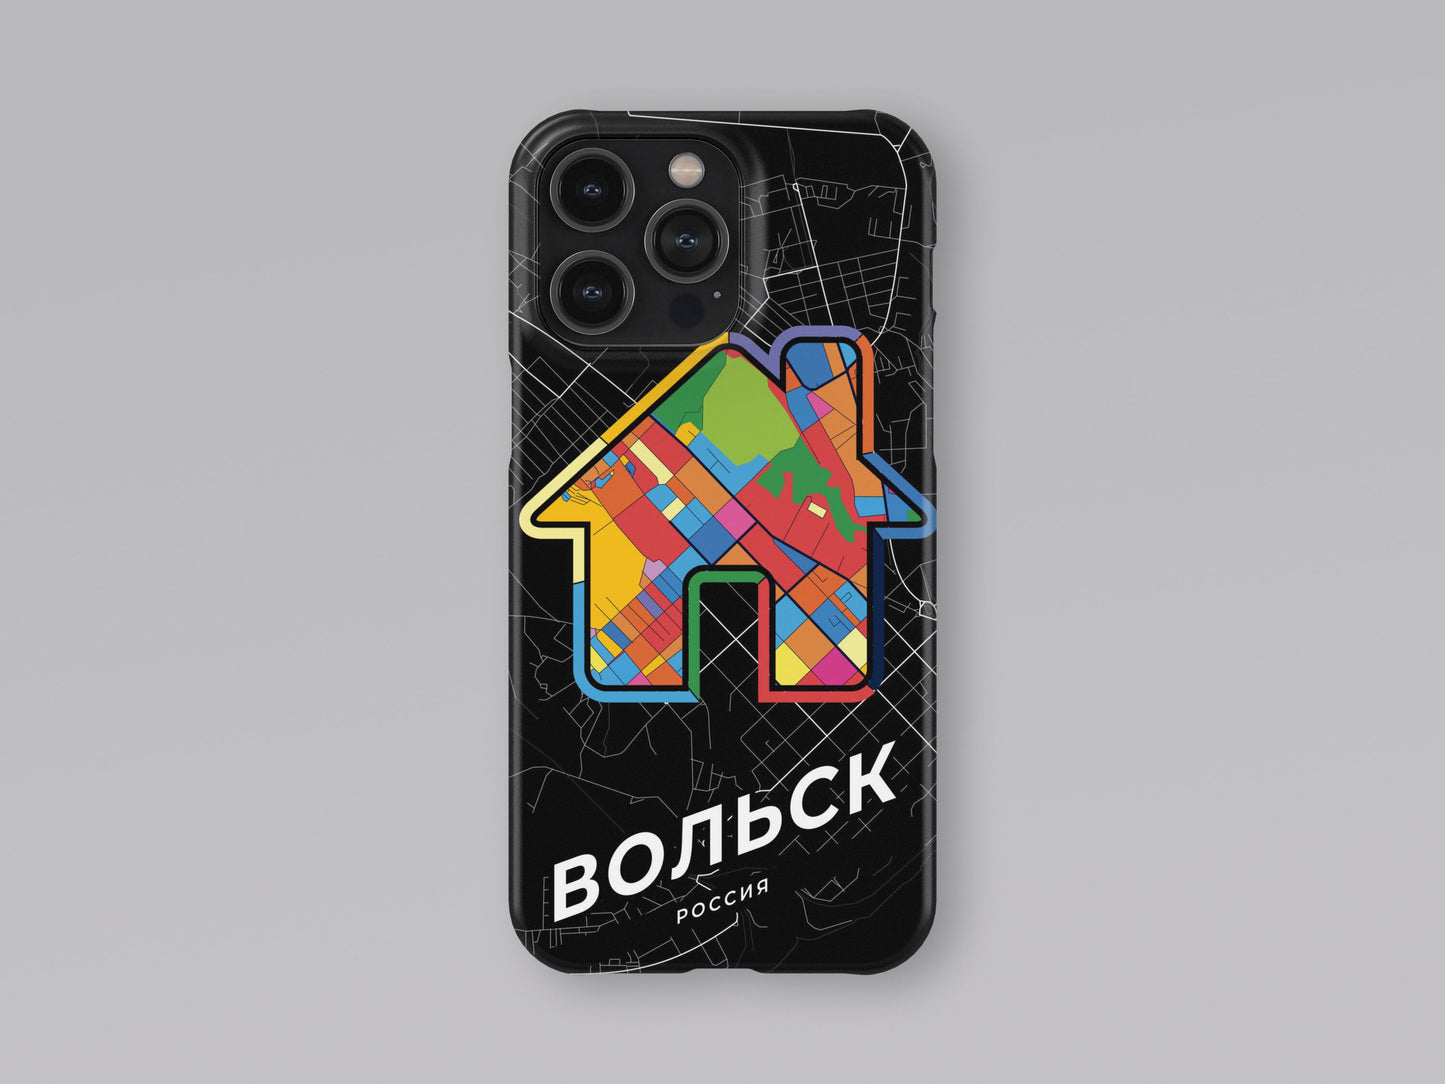 Volsk Russia slim phone case with colorful icon 3